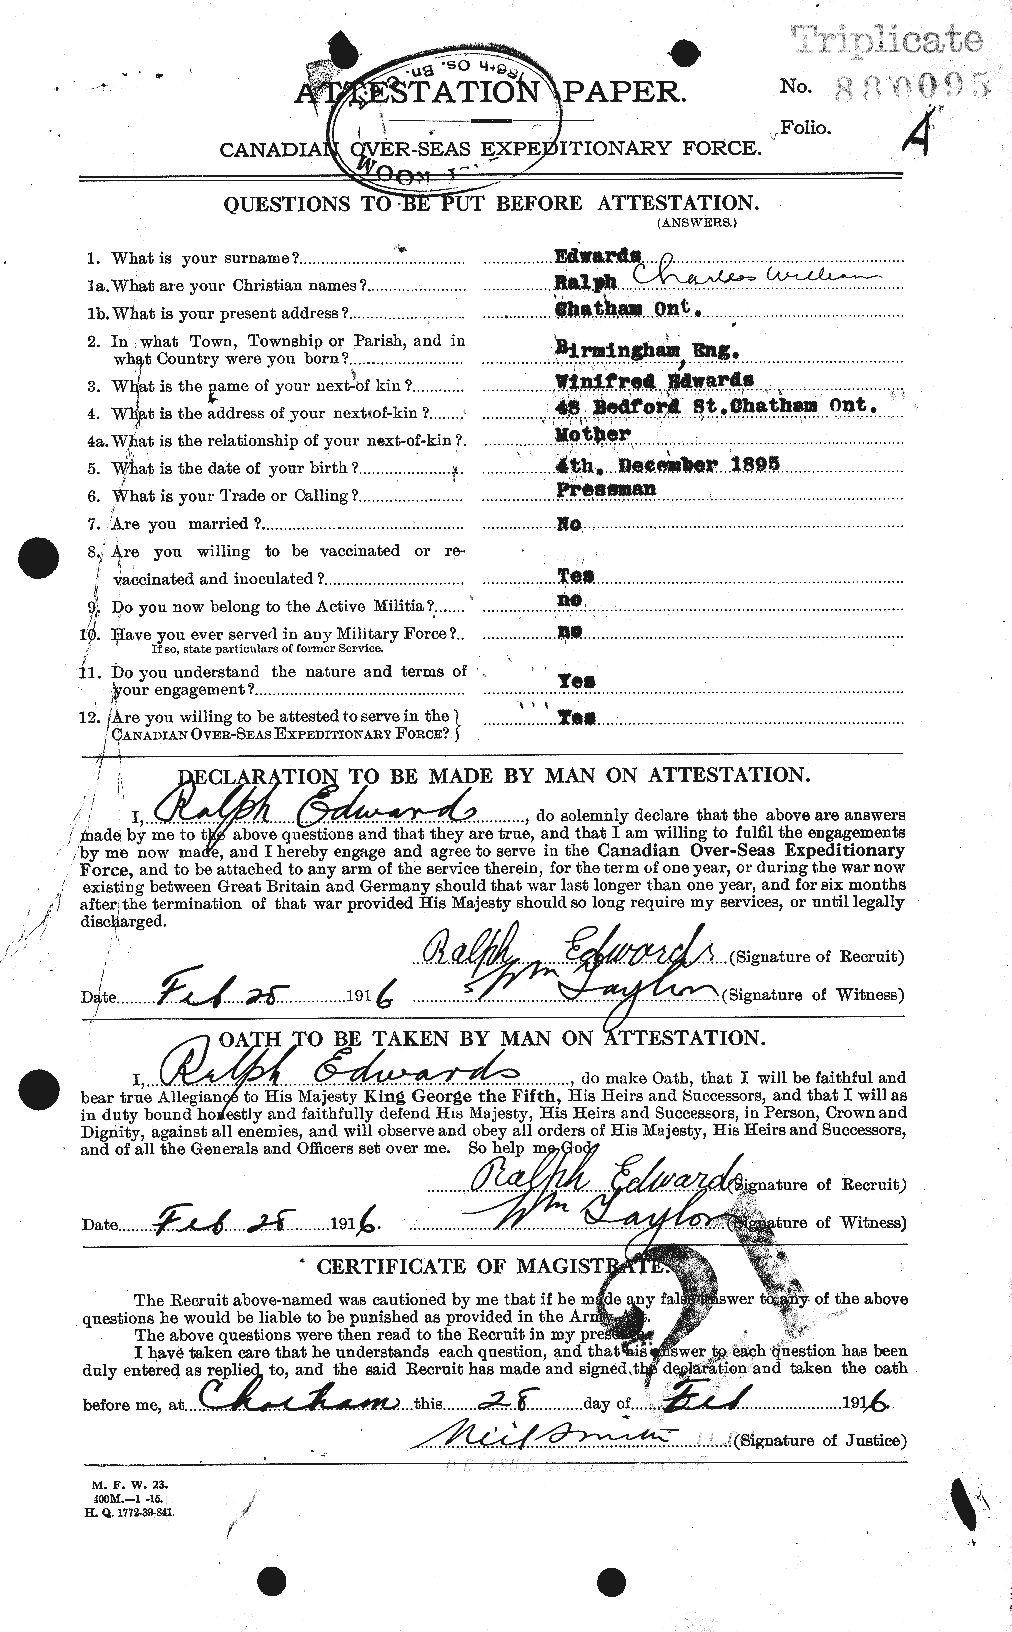 Personnel Records of the First World War - CEF 310244a